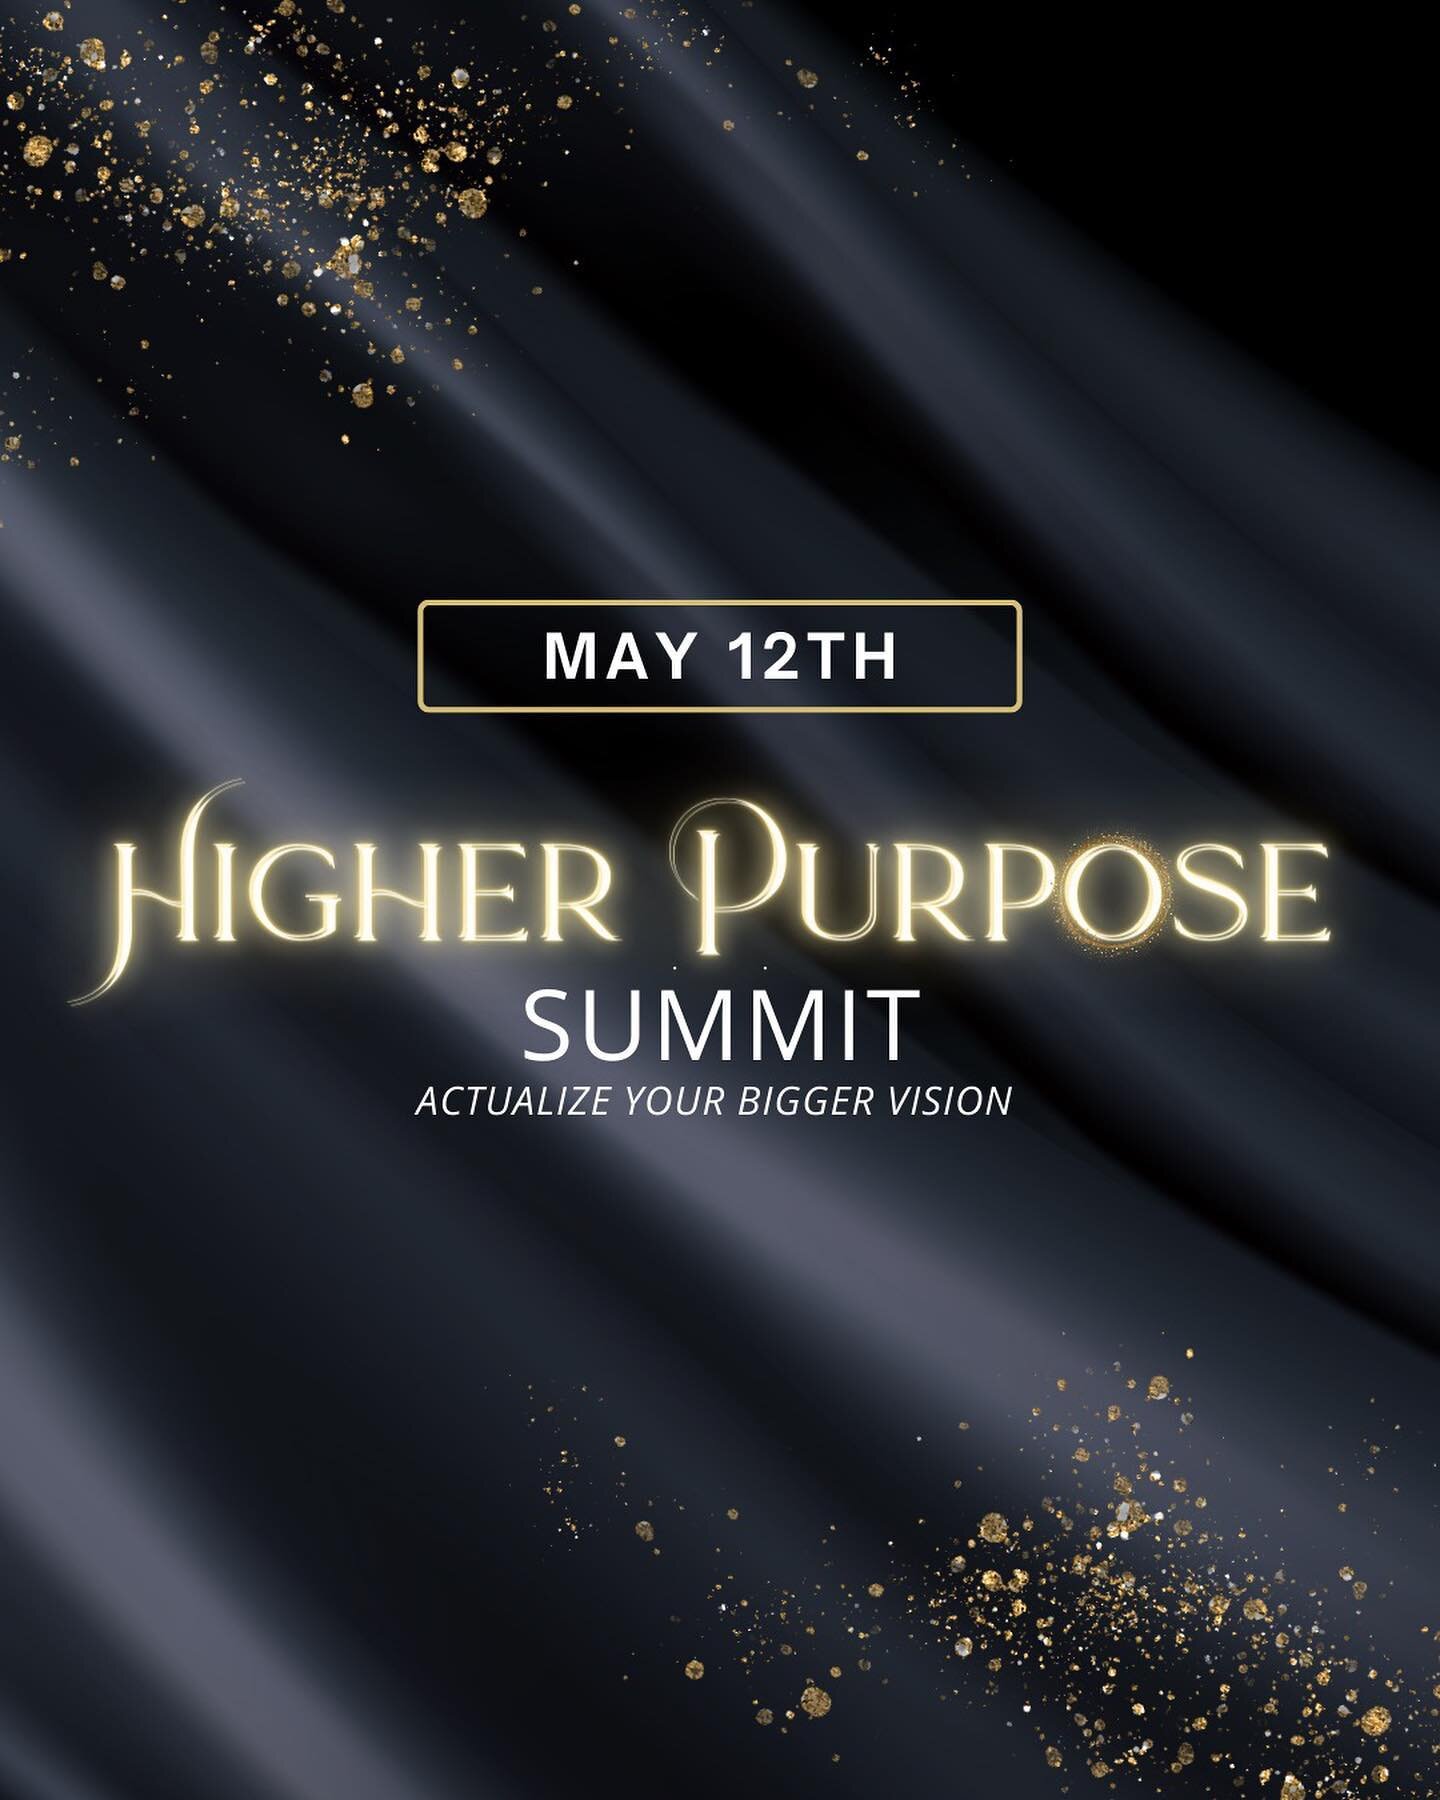 WE&rsquo;RE GOING LIVE TOMORROW!!~~~~ 
The Higher Purpose Summit (HPS) is a free, full-day event for aspiring or seasoned entrepreneurs ready to evolve and expand their business into their higher vision&mdash; the new iteration or evolution of their 